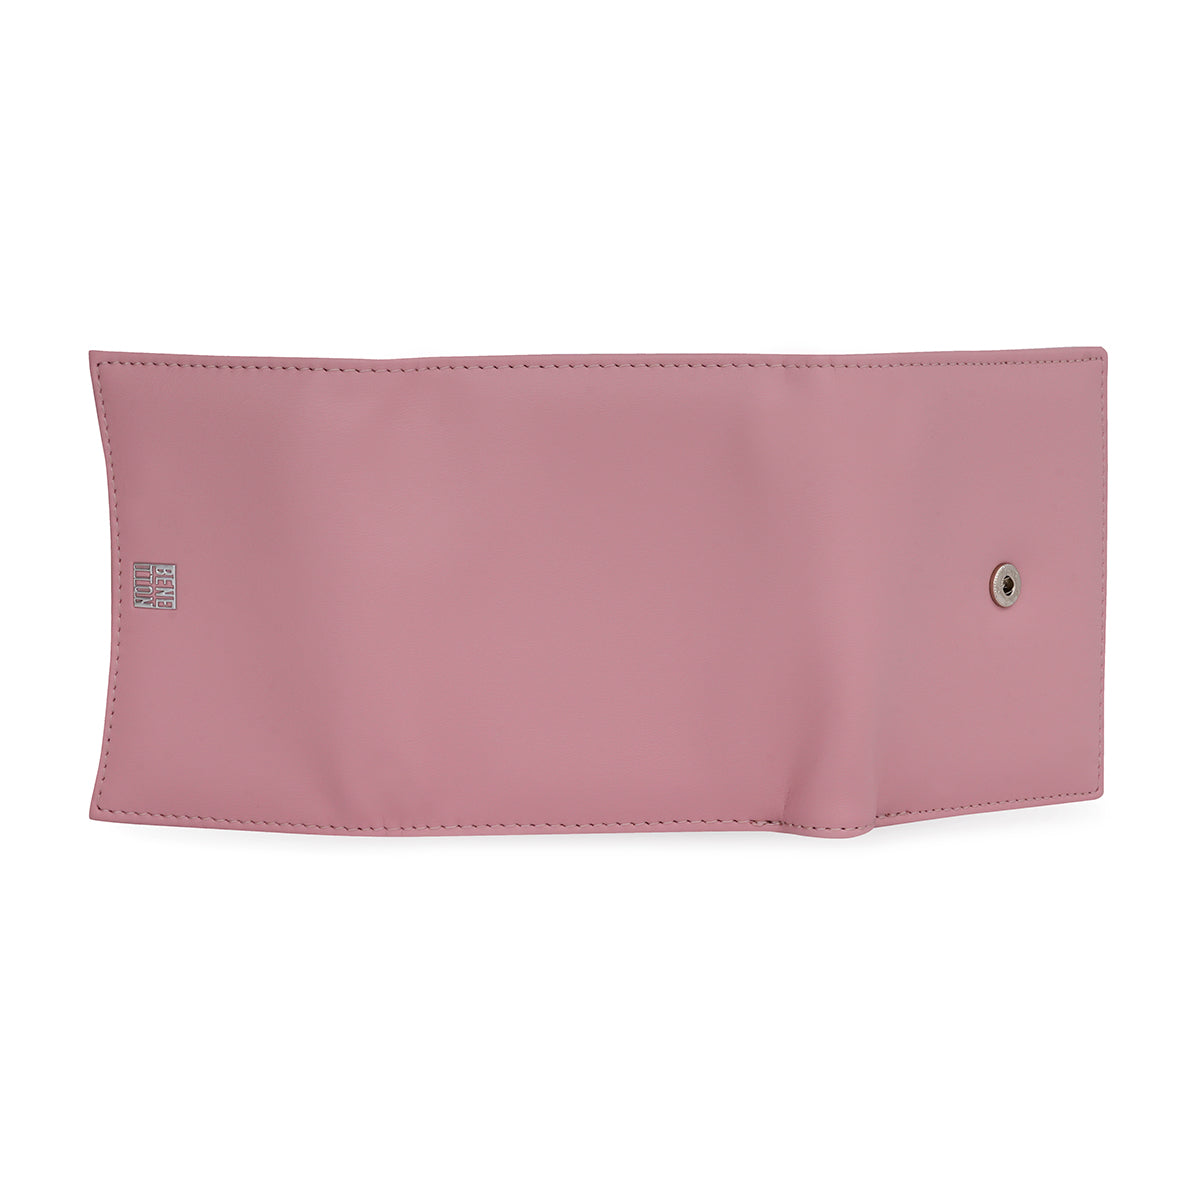 United Colors of Benetton Lina Wallet pink